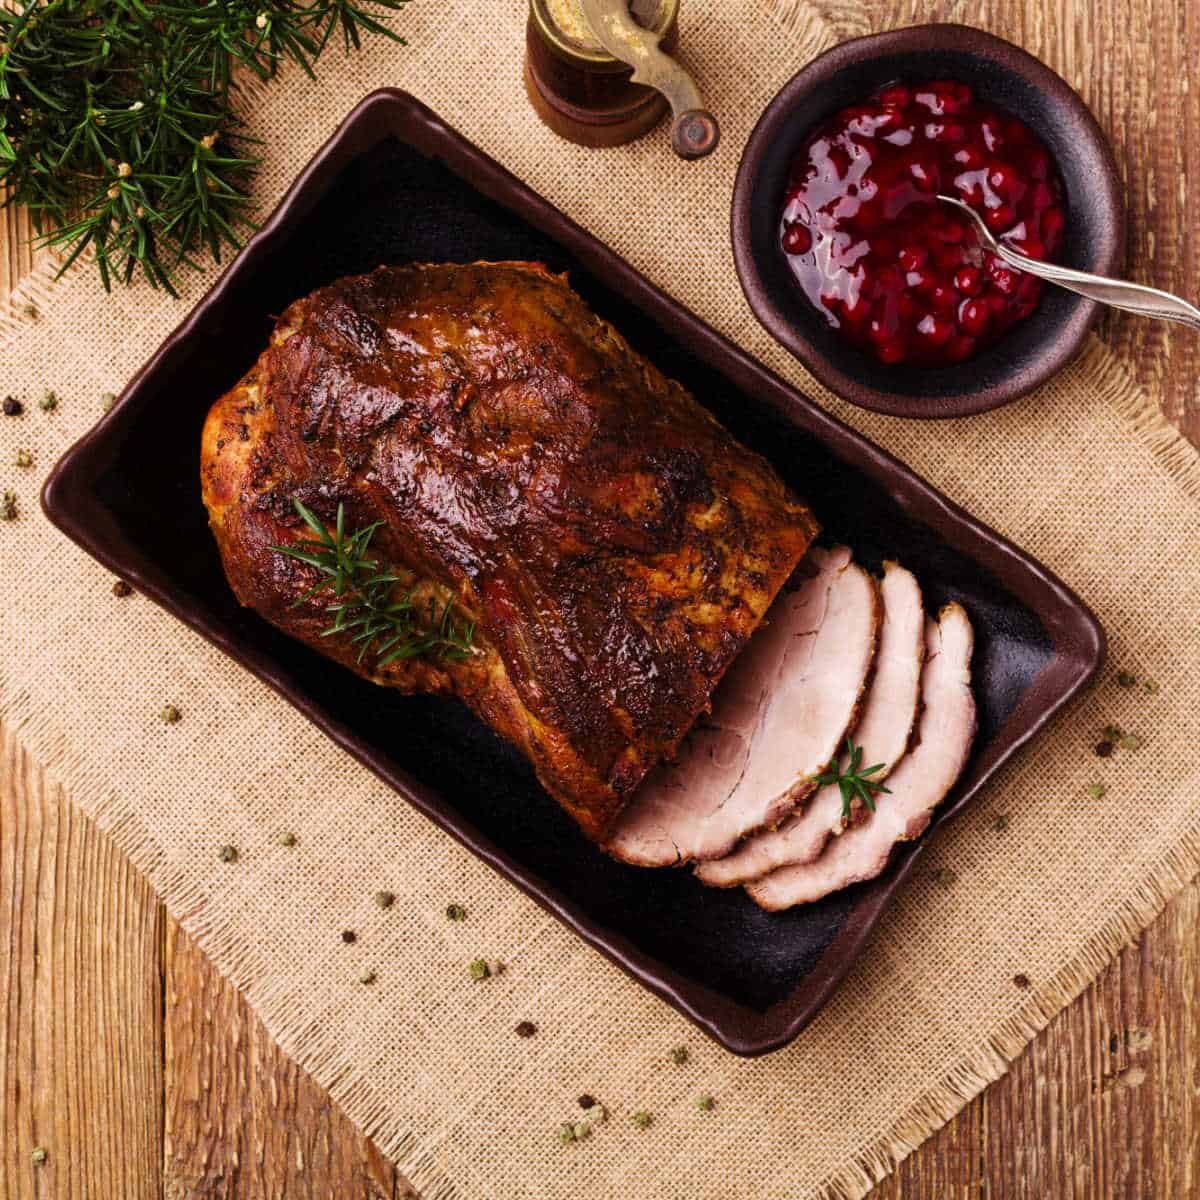 Pork roast cooked in slow cooker glazed with cranberry sauce in roasting pan set on tan burlap napkin with cranberry sauce glaze in a brown bowl